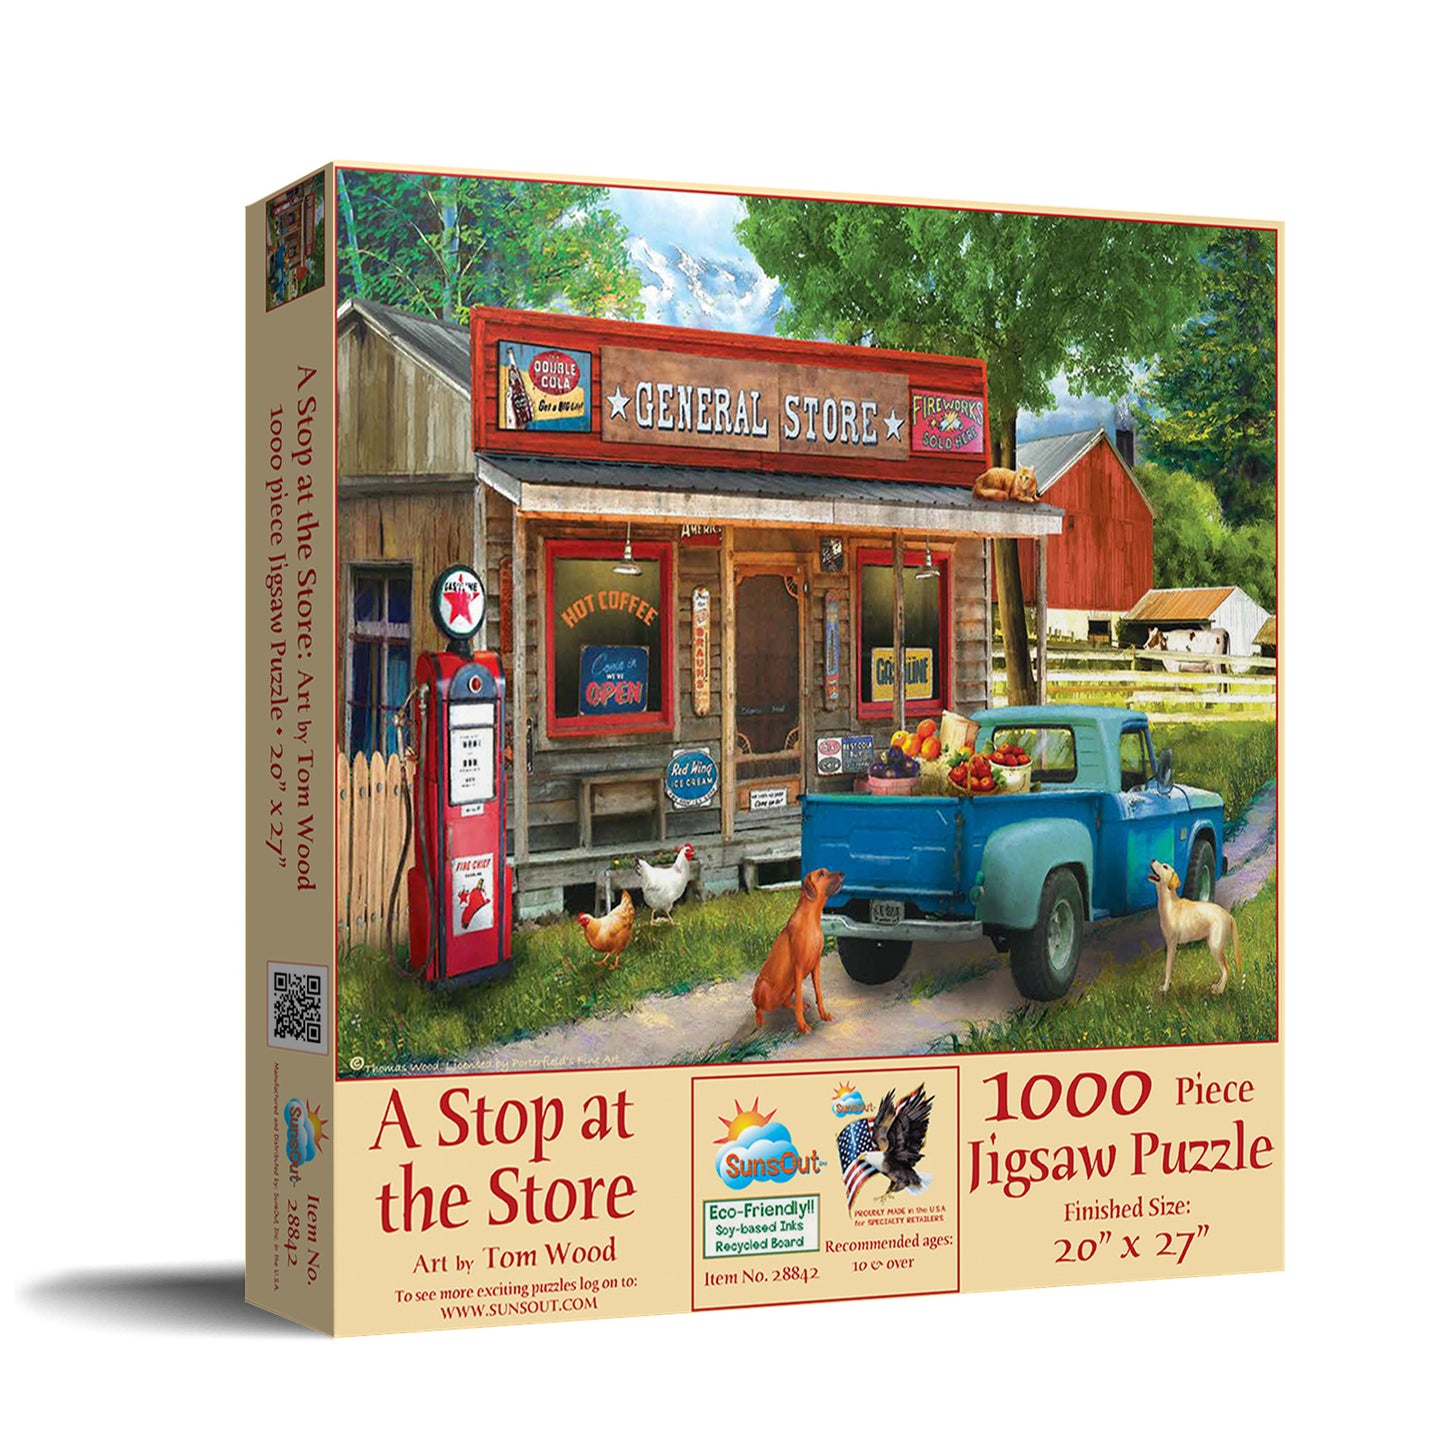 A Stop at the Store - 1000 Piece Jigsaw Puzzle